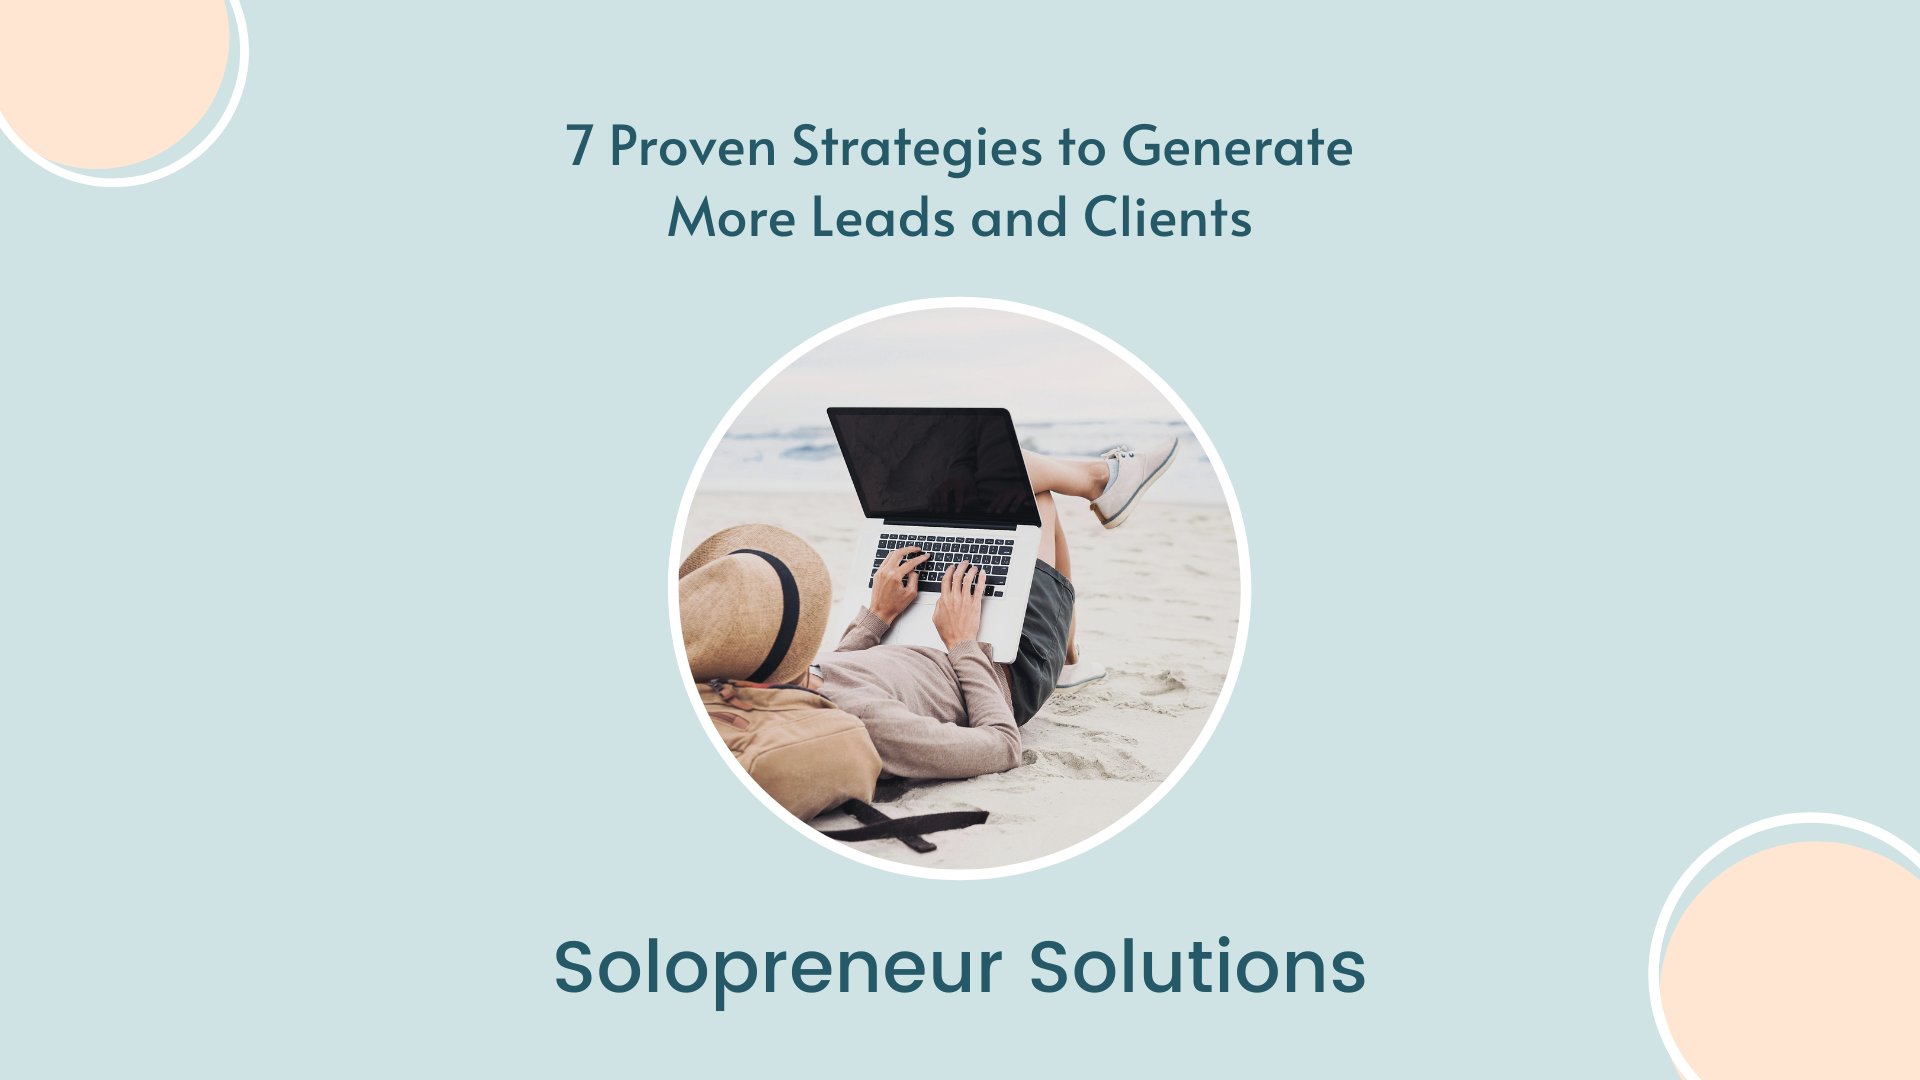 7 Proven Strategies to Generate More Leads and Clients